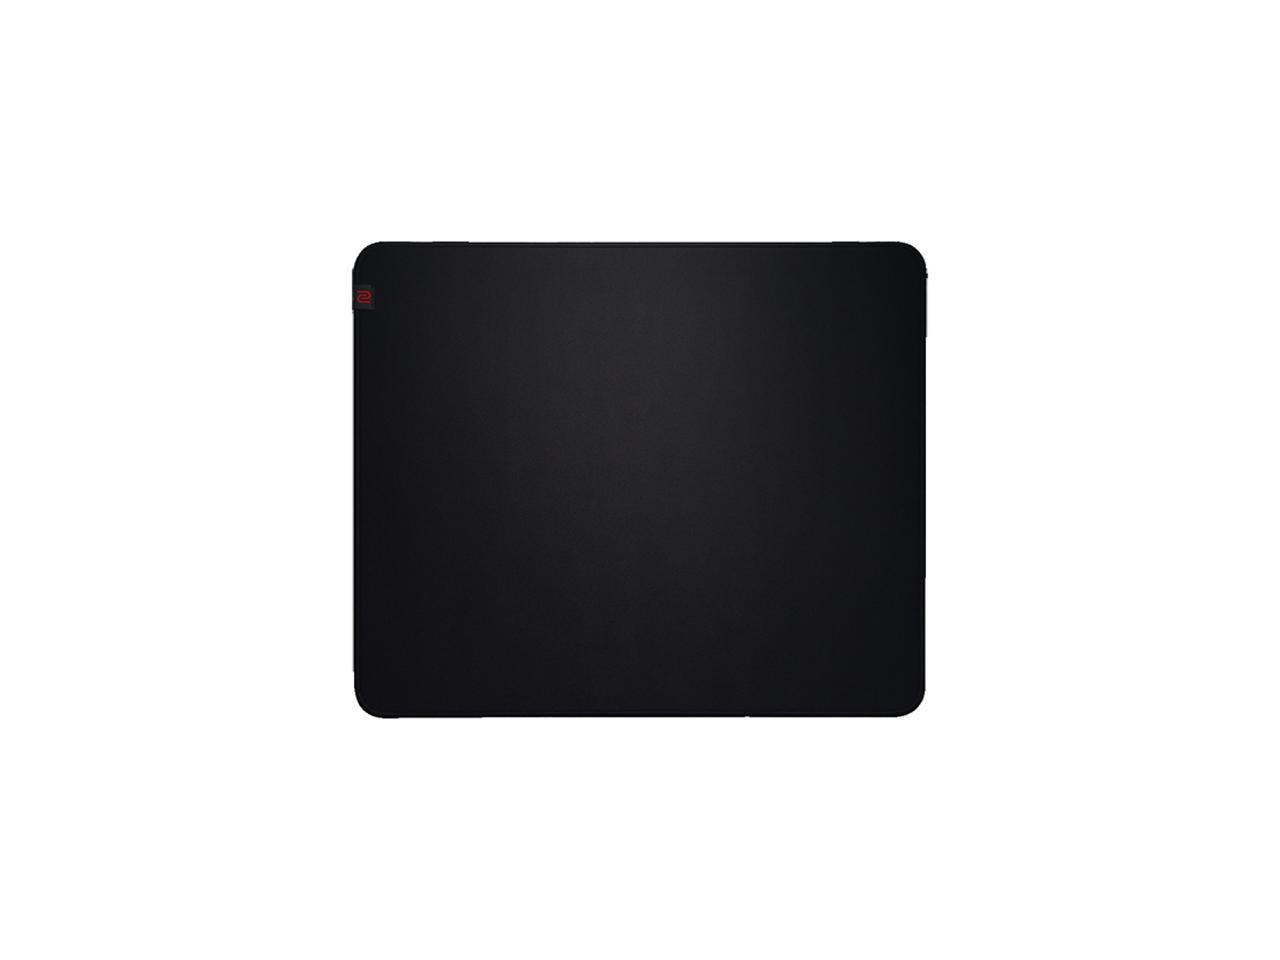 Benq Zowie P Sr Small Mouse Pad For Esports Smooth Cloth Soft Rubber Base 100 Flat Stitched Edge Newegg Com